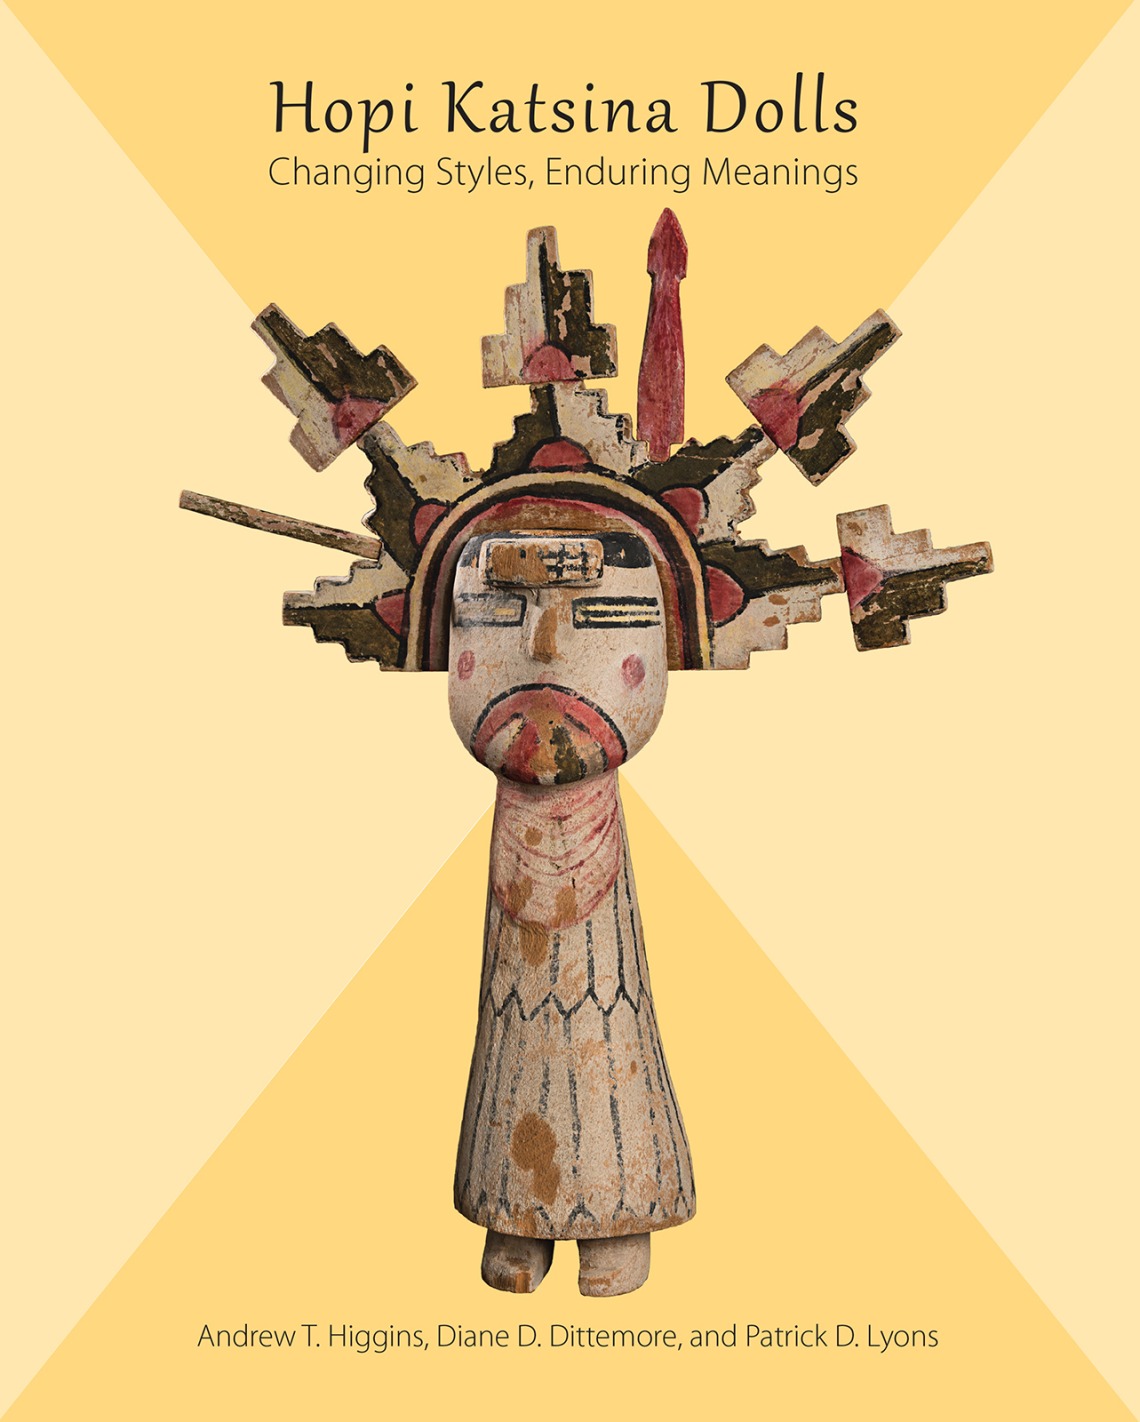 Hopi Katsina Dolls: Changing Styles, Enduring Meanings Cover Page